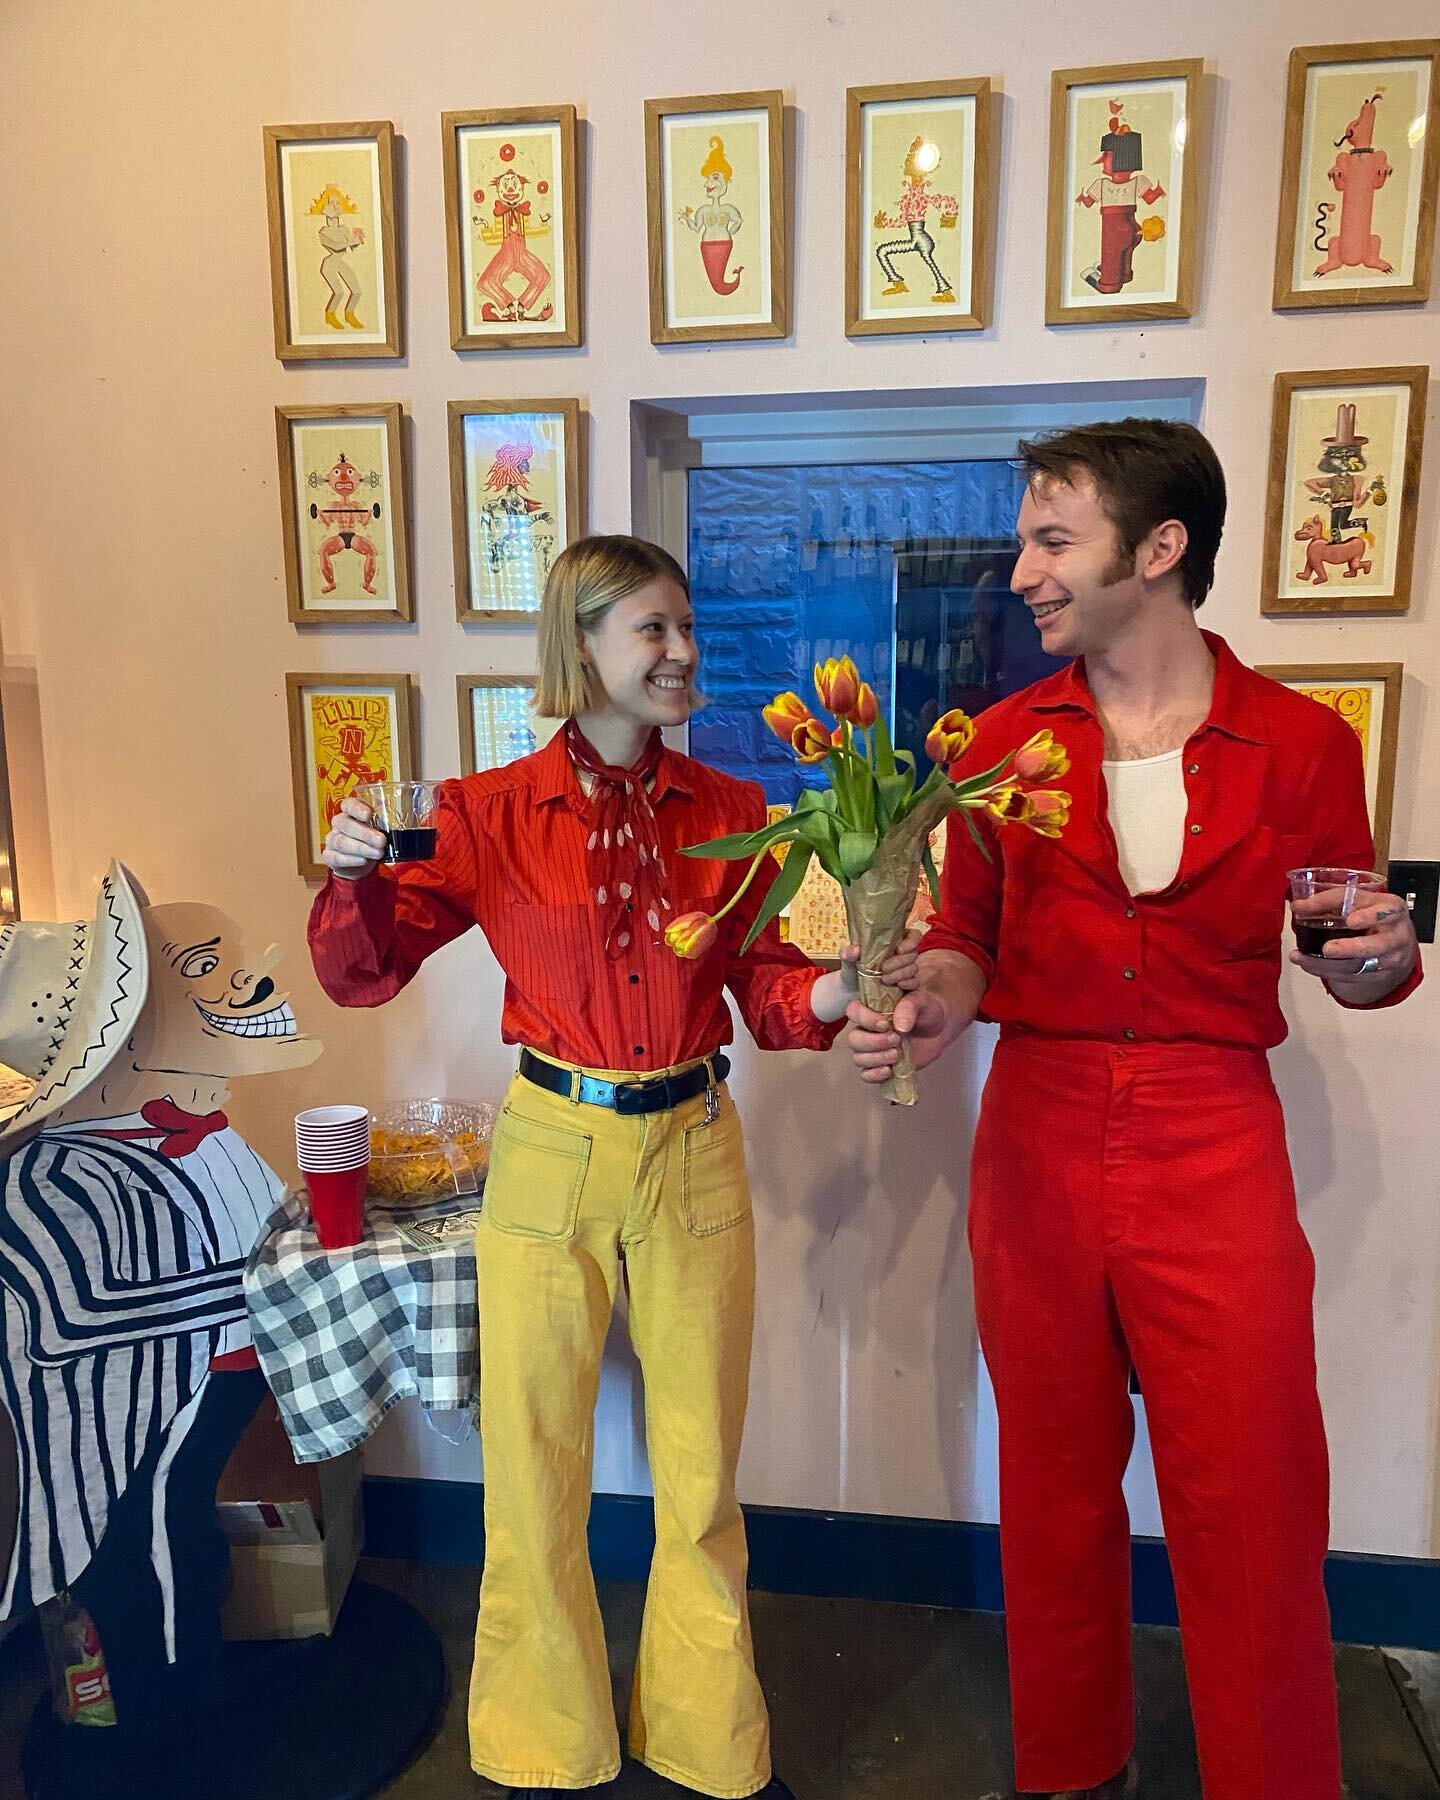 Thank you to everyone who came out last night for our first Friday opening at @tinysbottleshopphilly ❤️💛

A big thank you to the kitchen staff @thelunarinn for whippin&rsquo; up delicious hot dogs and to @jacobsipos for developing some exciting cock